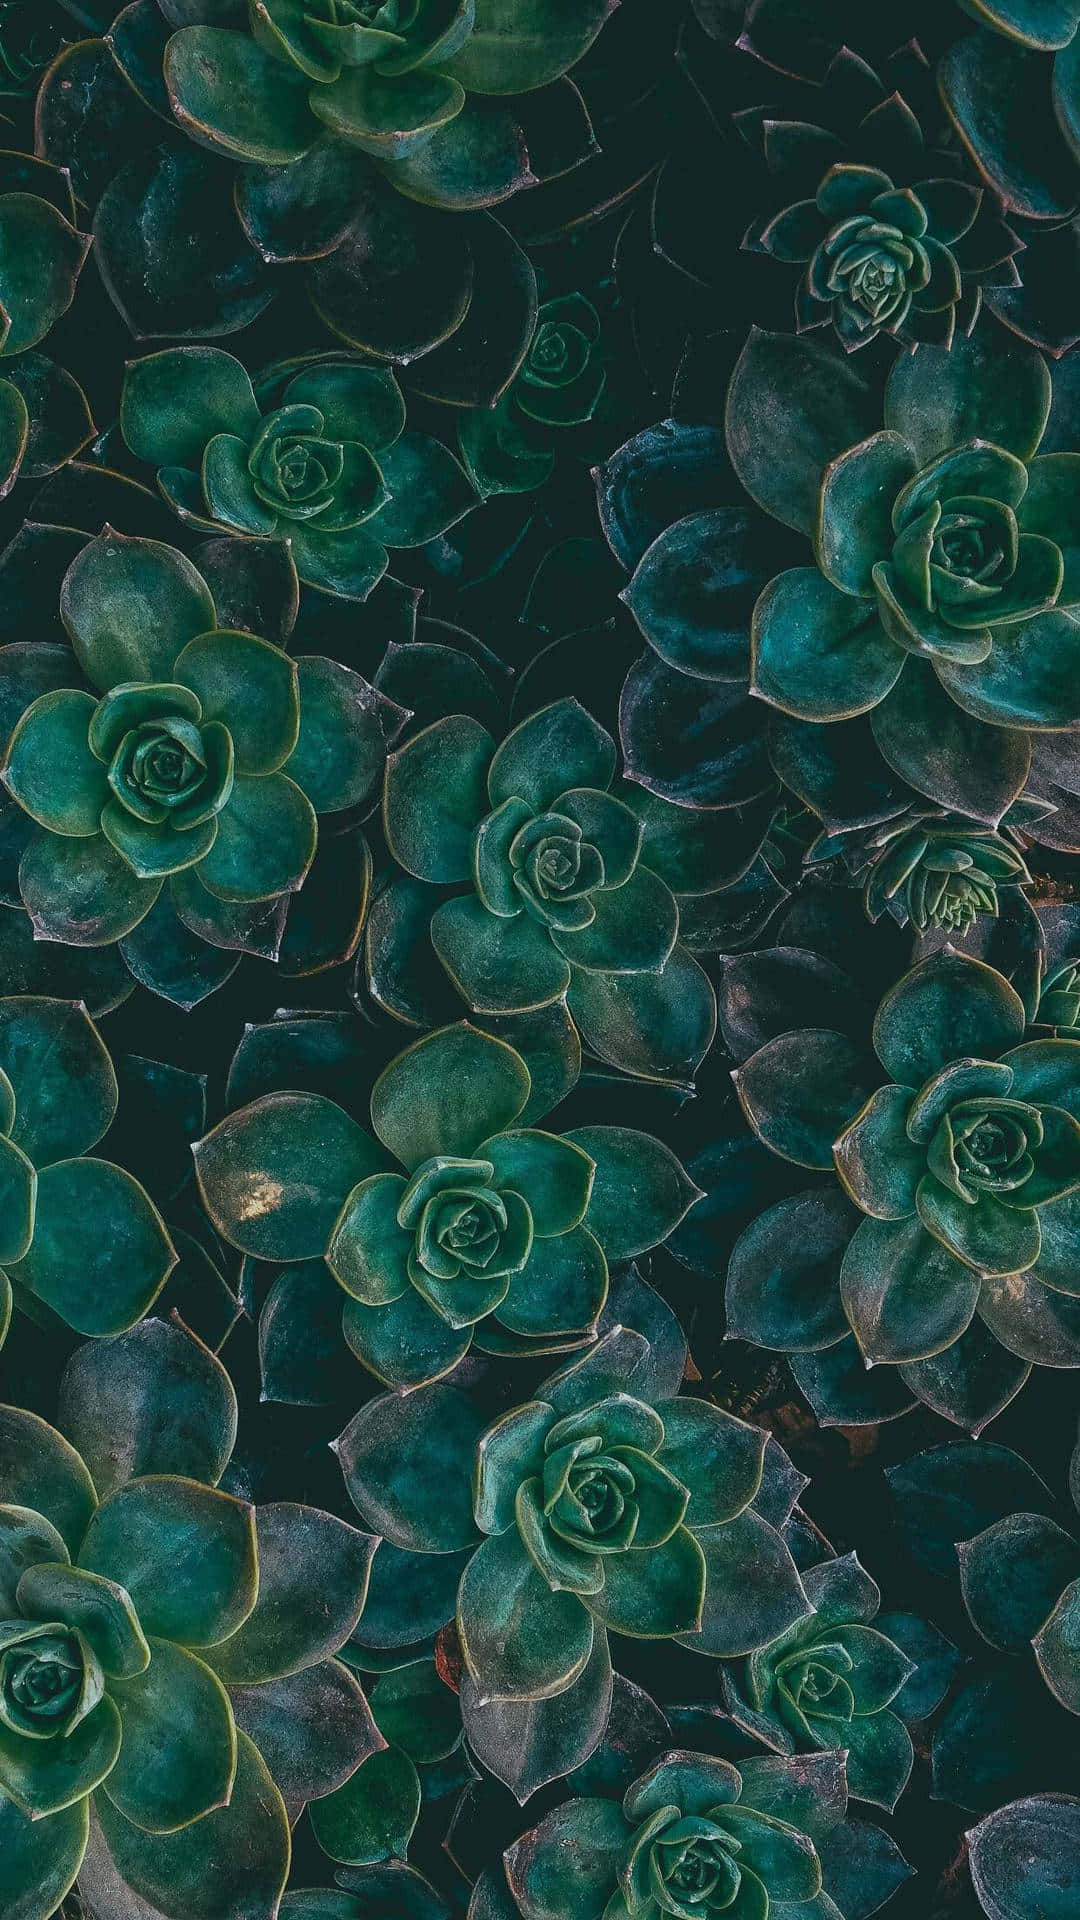 Vibrant Succulent Aesthetic for iPhone Wallpaper